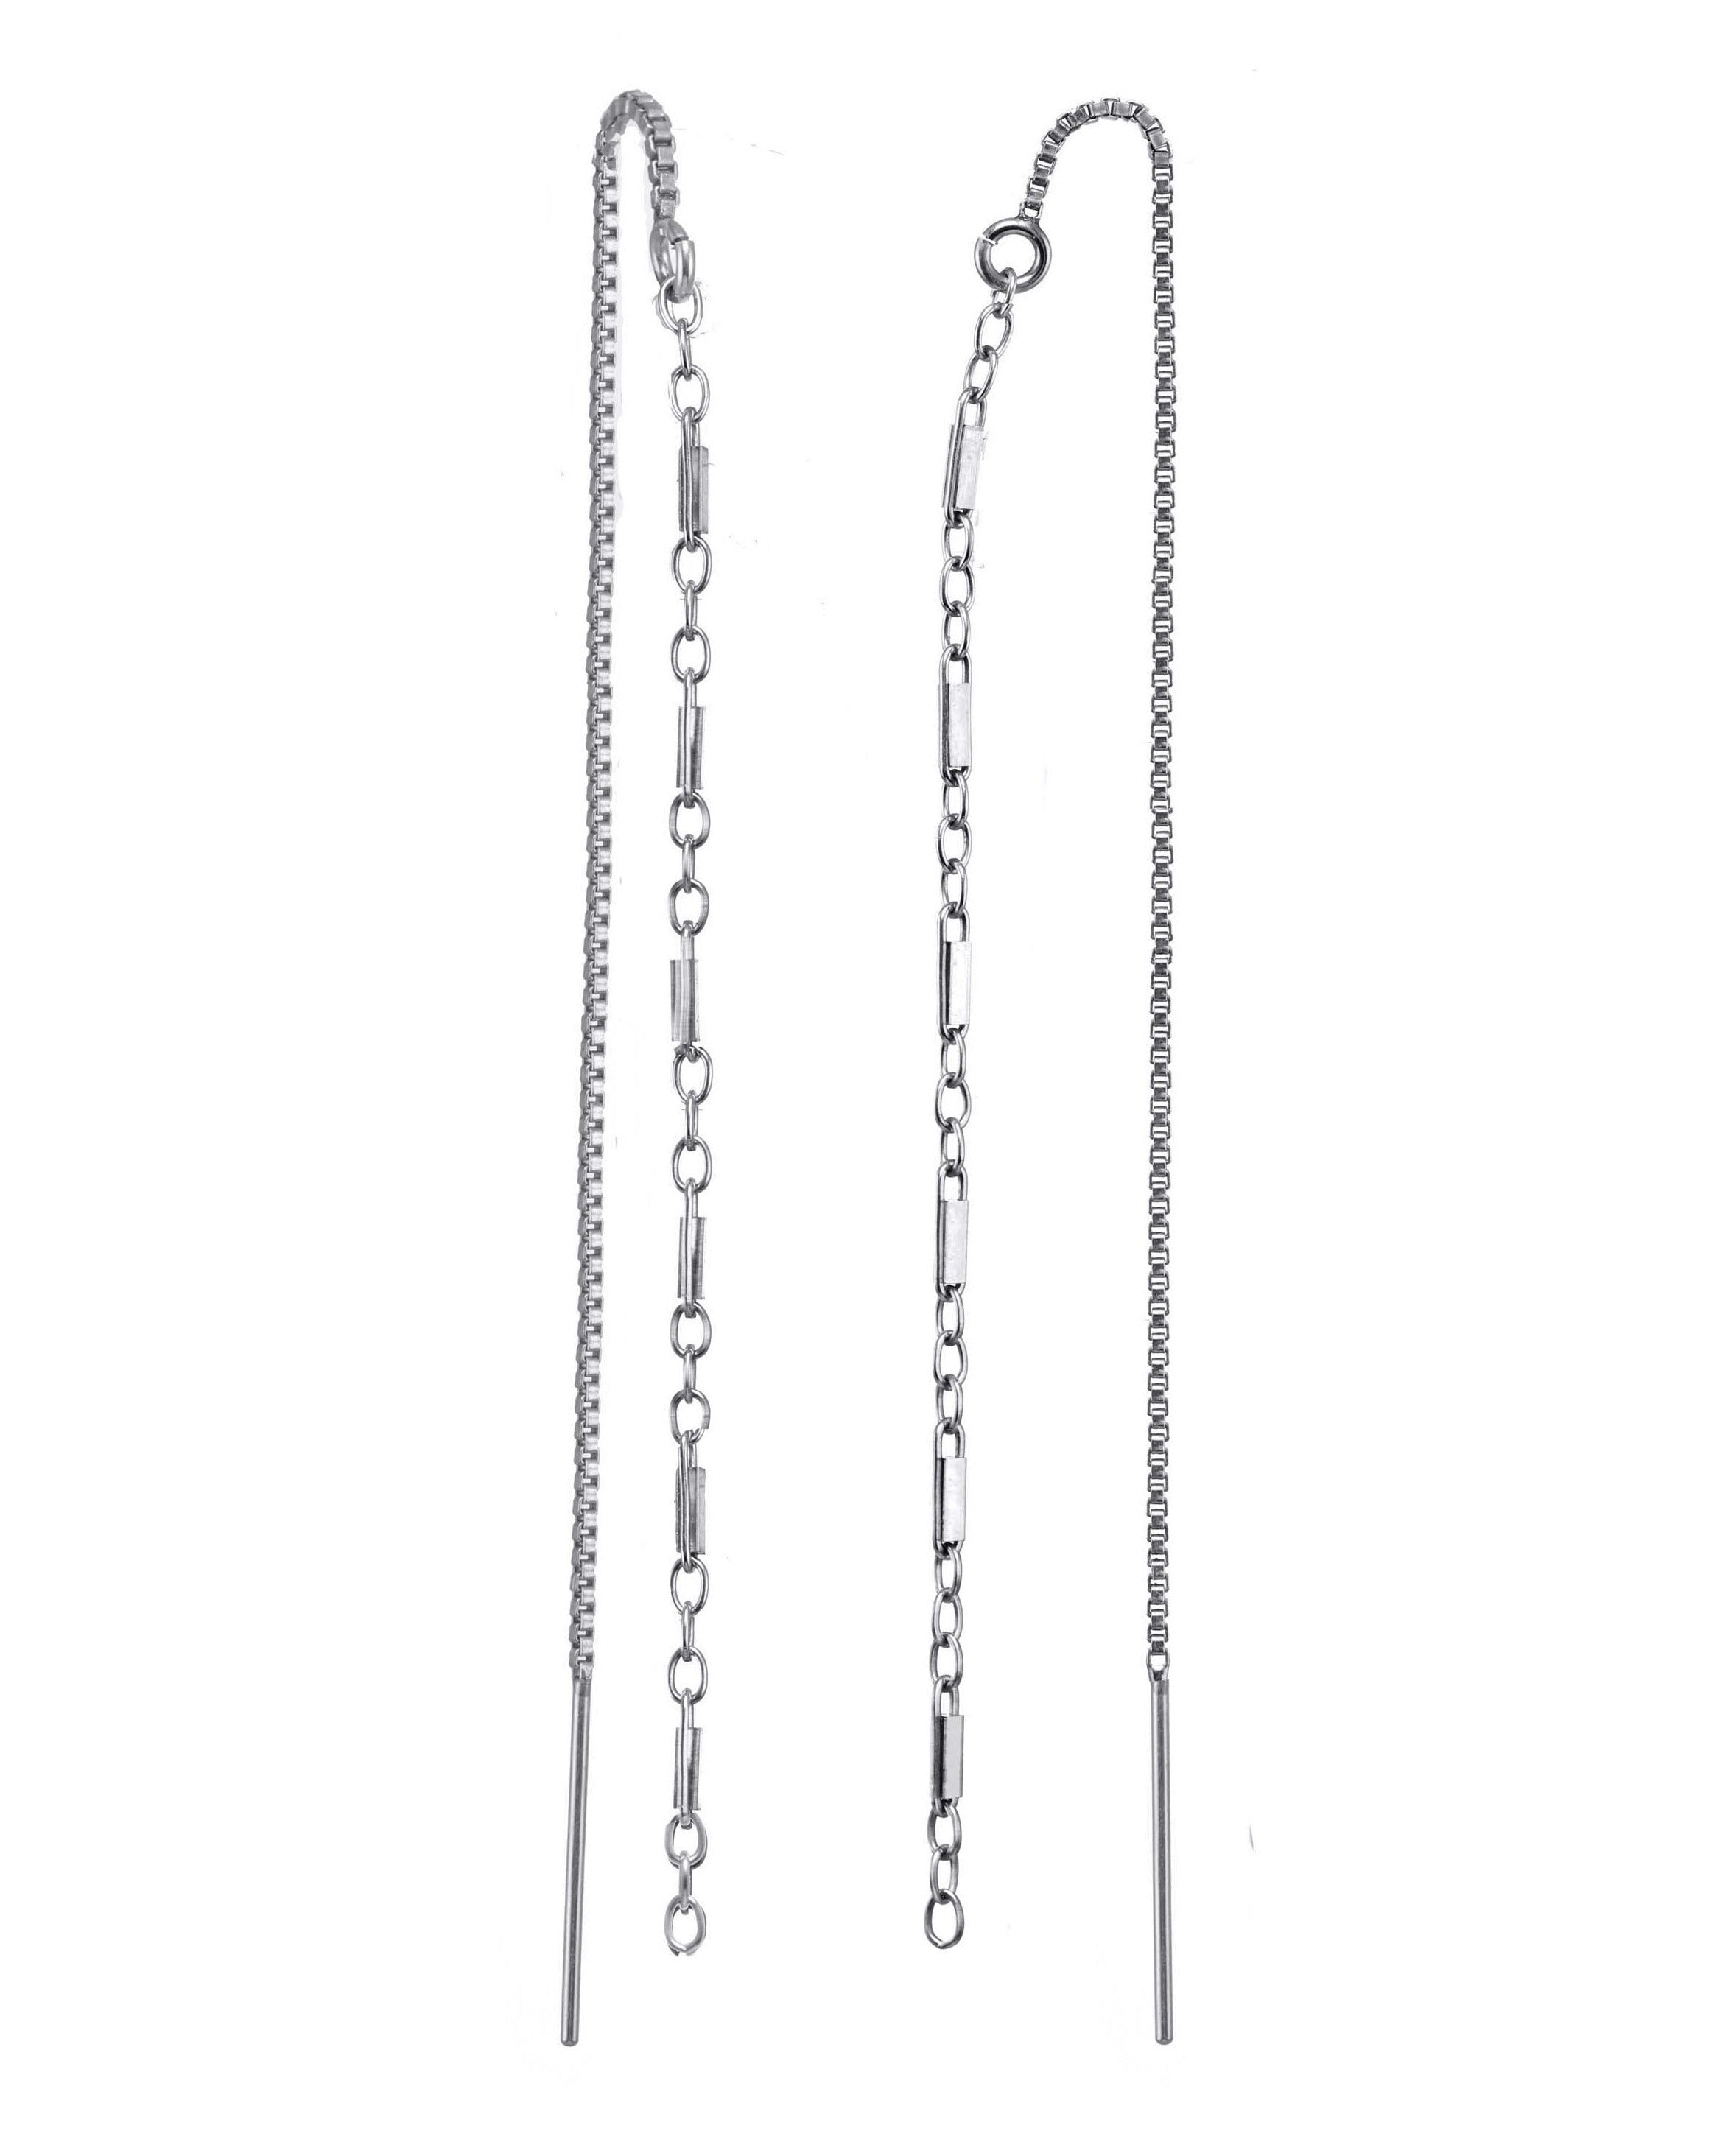 Nevaeh Threaders by KOZAKH. Threader style earrings with cylindrical link chain in front, box chain in back, and has a drop length of 2 inches on each side, crafted in Sterling Silver.